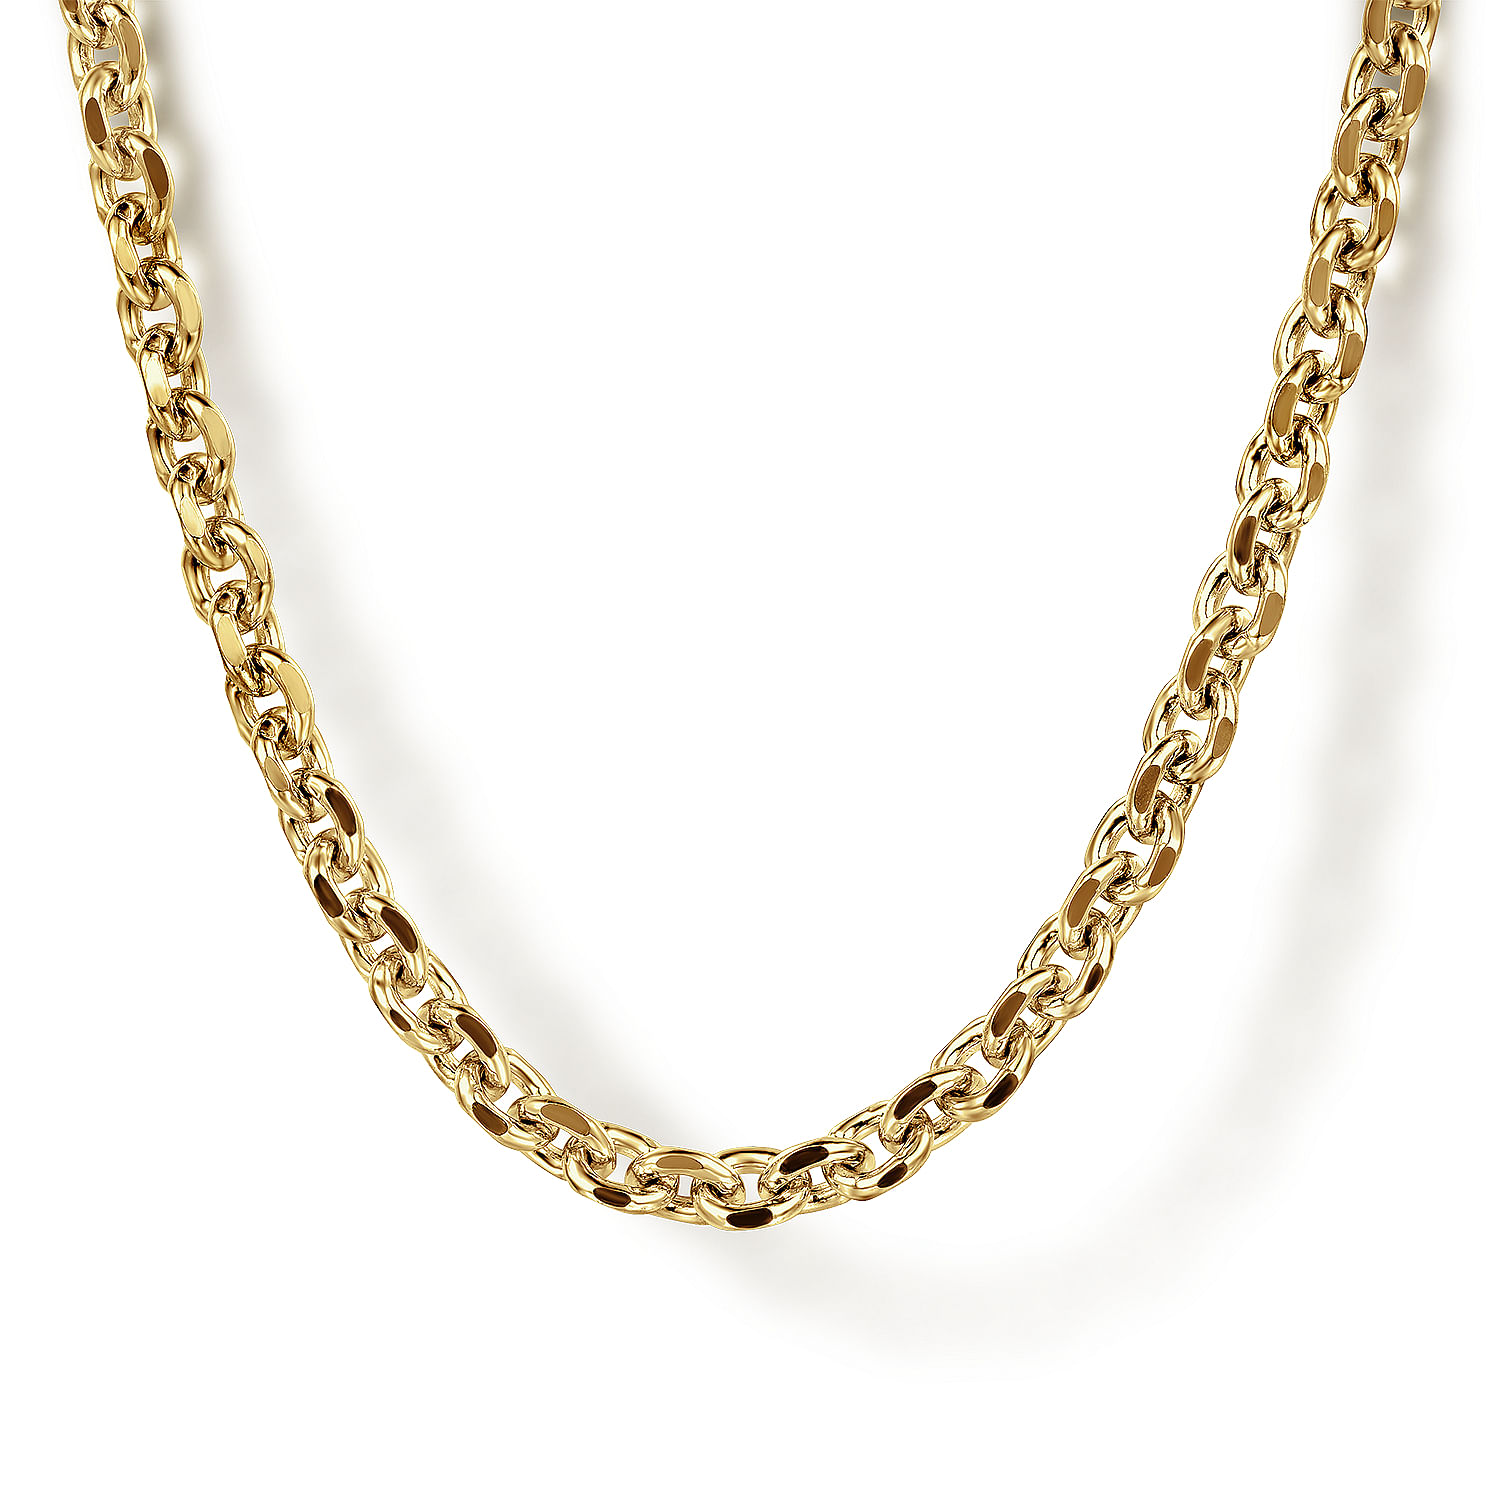 22 Inch 14K Yellow Gold Mens Link Chain Necklace